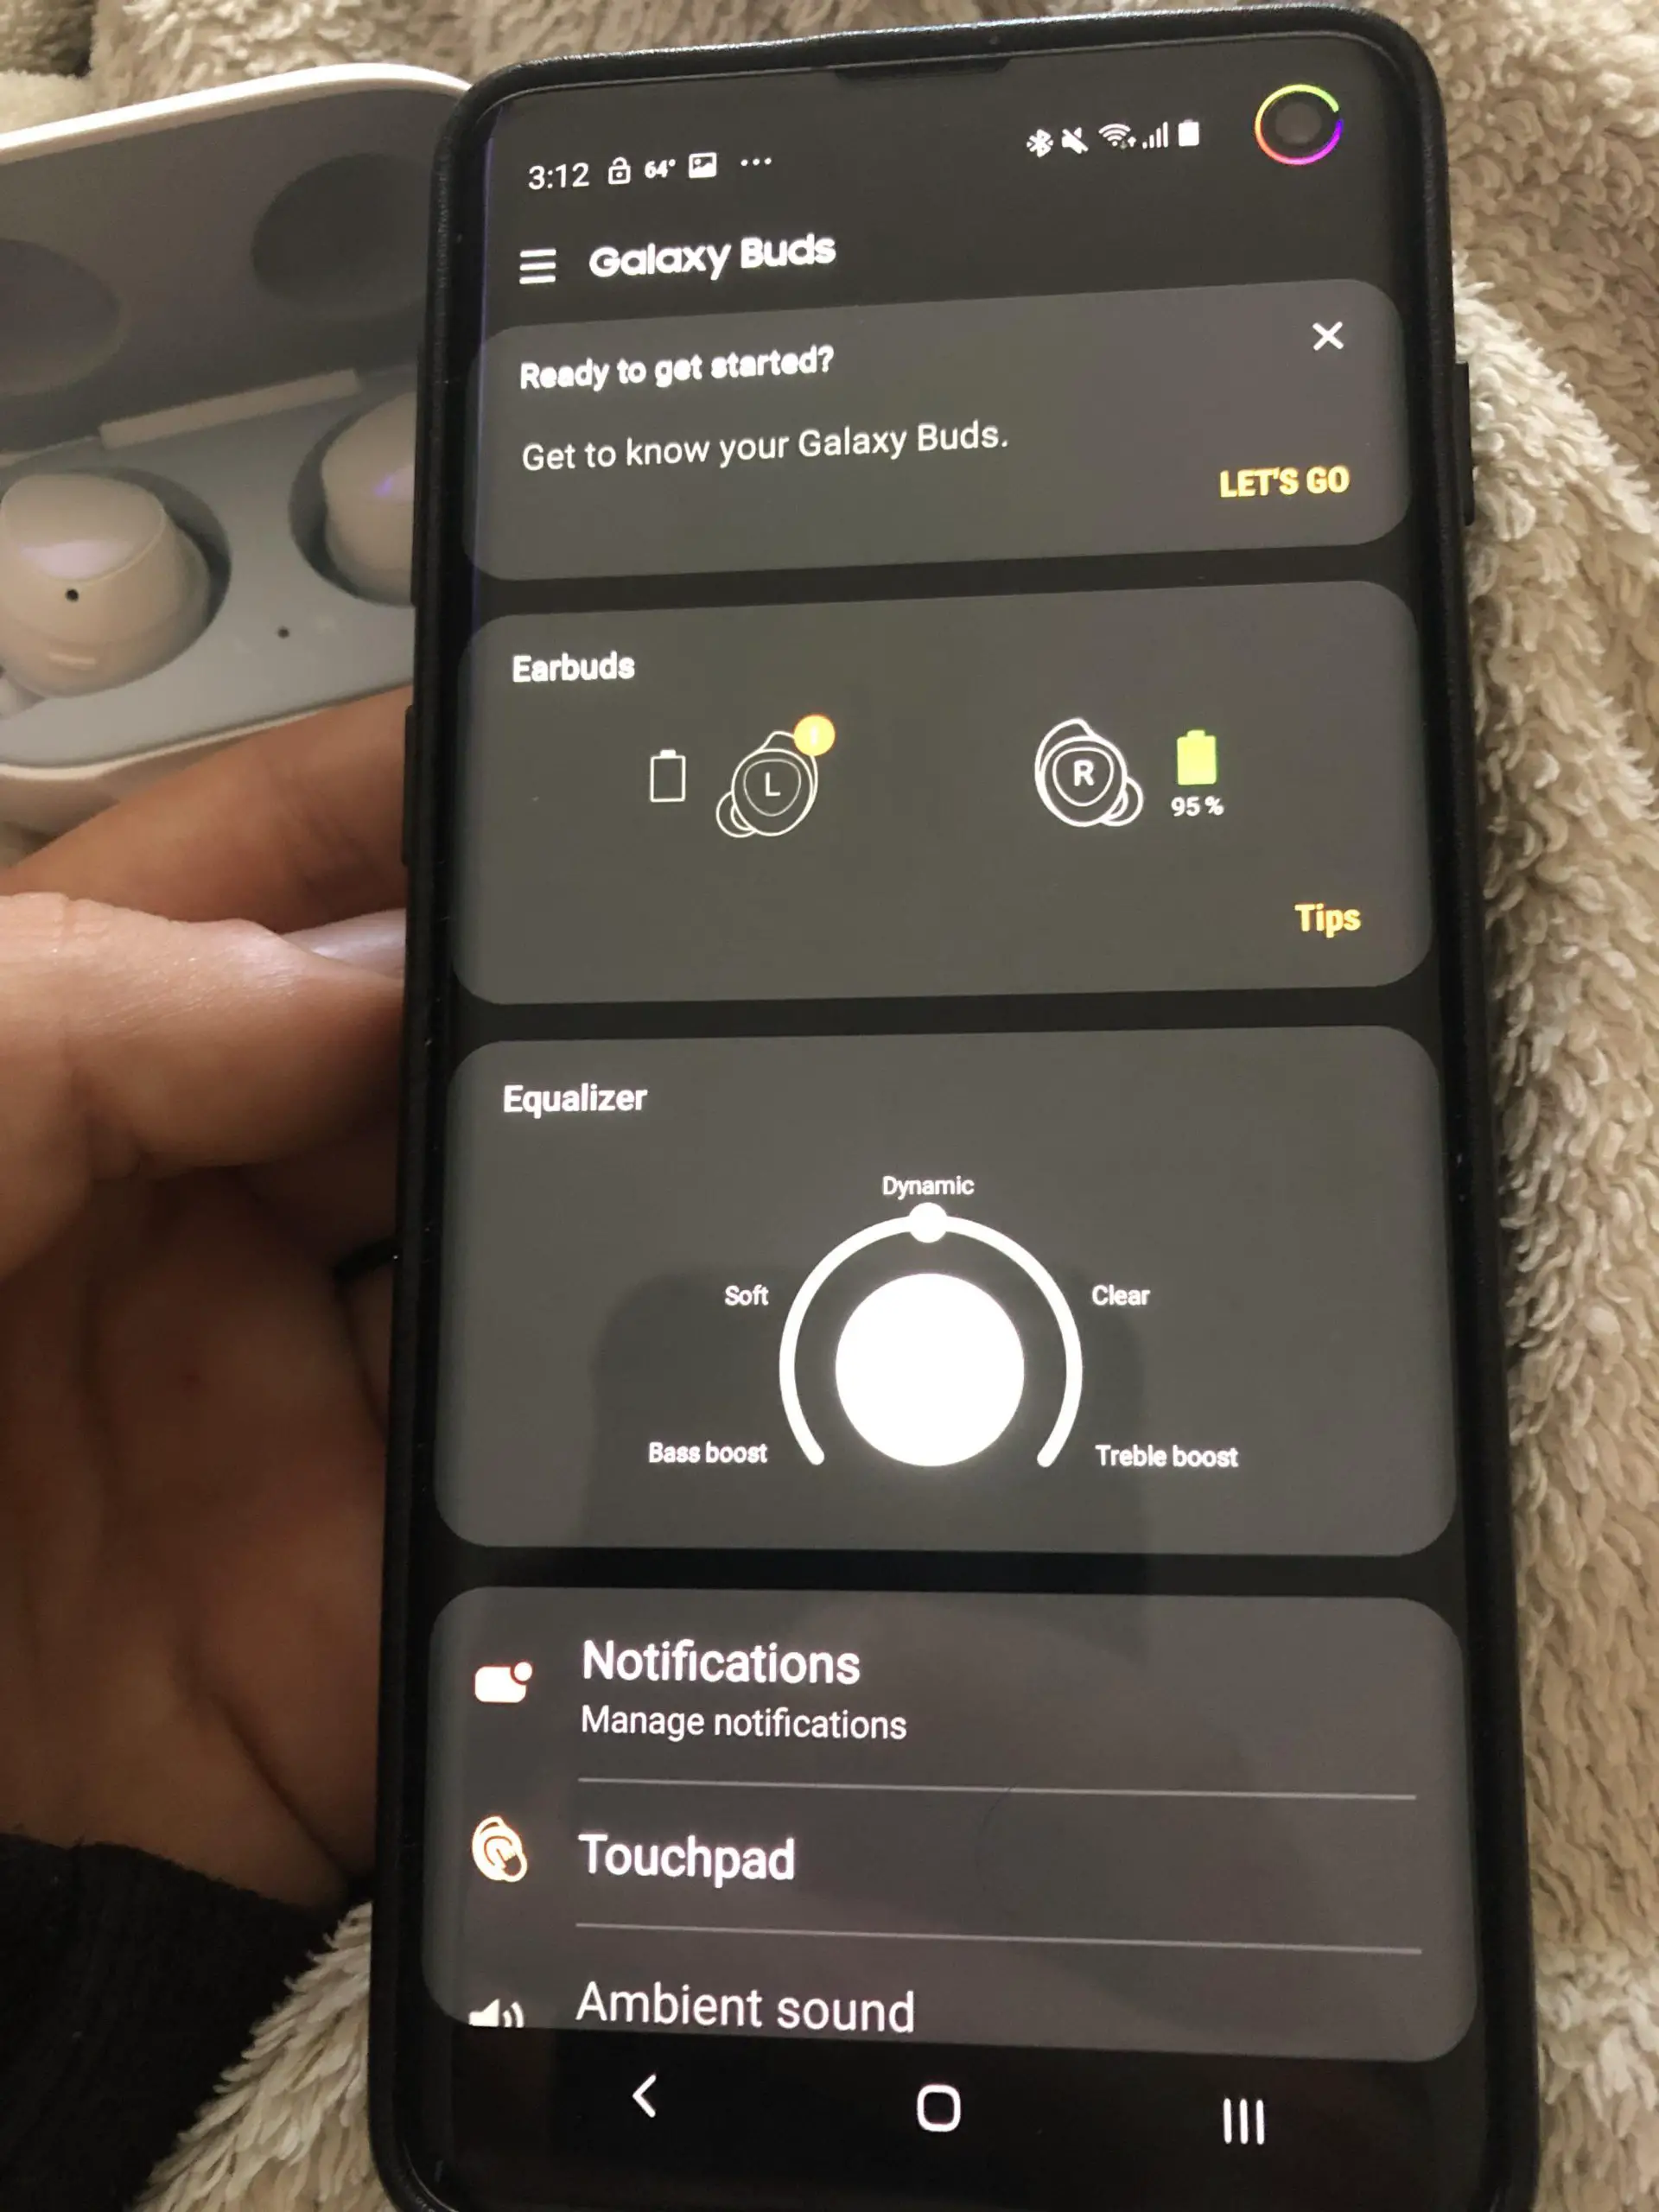 How to reset your Galaxy Buds